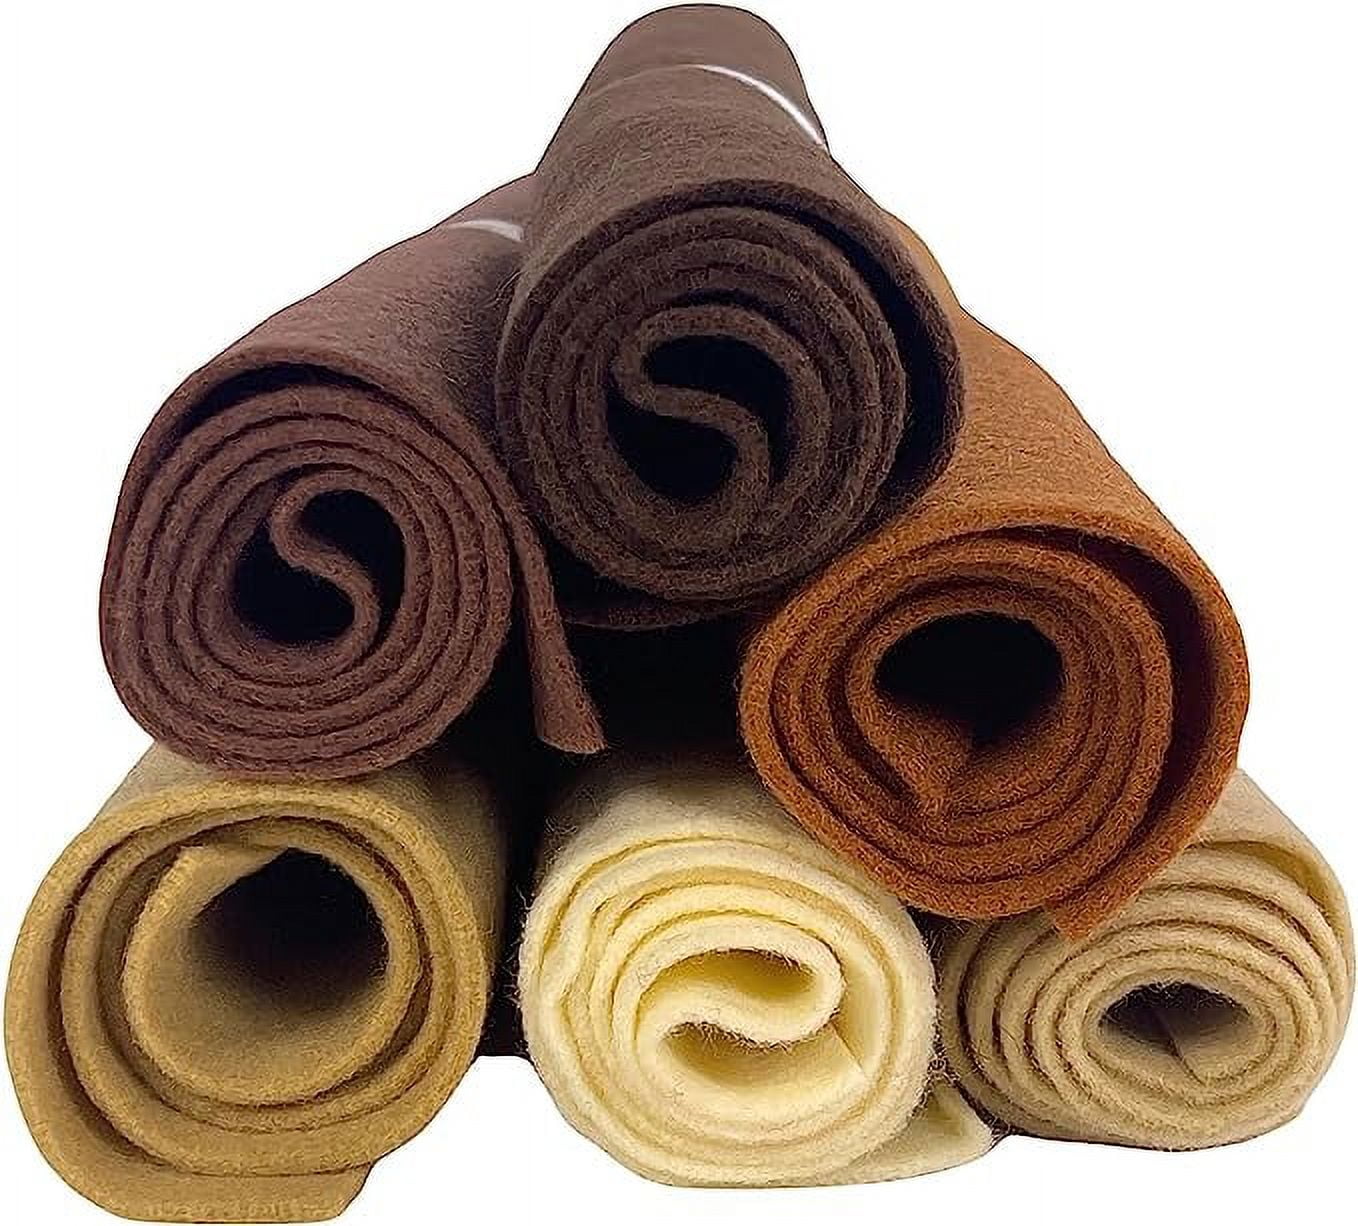 Chocolate Brown Felt Fabric 60 150cms Extra Wide 1mm Thick for School  Projects. Sewing, Decoration, Craft Supplies and Table Covers 